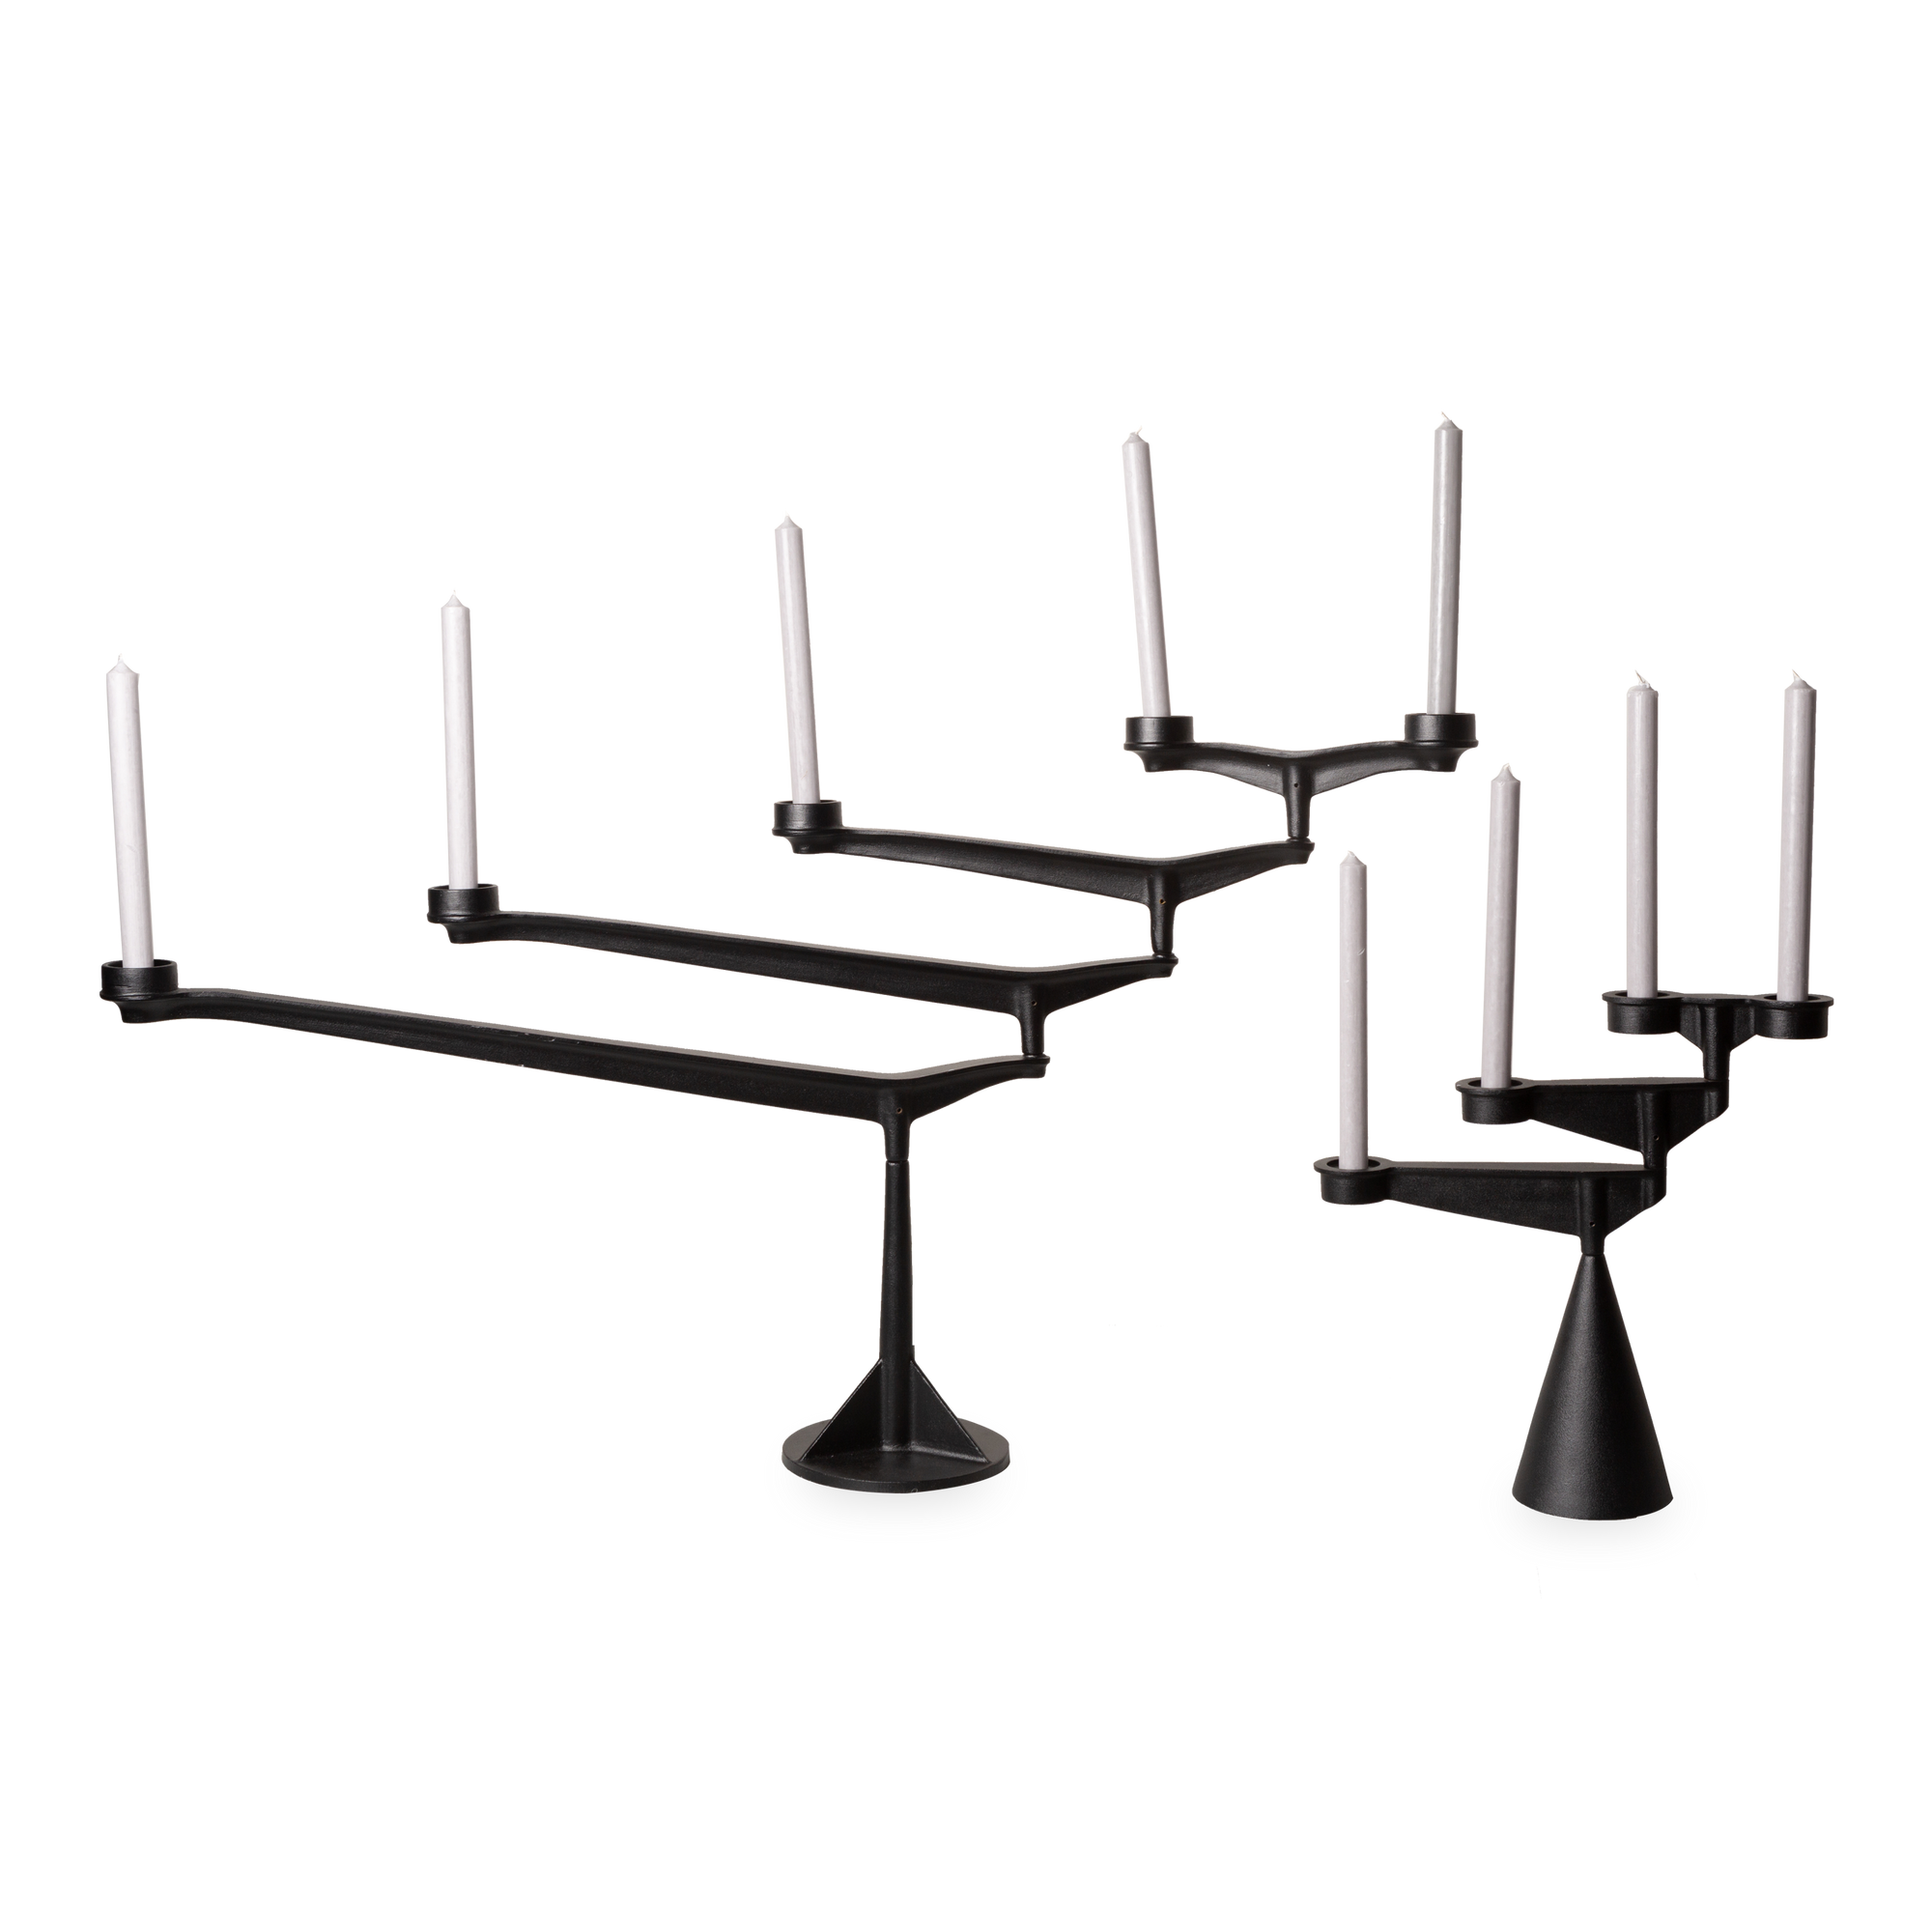 The Spin Candleholders are an industrial-strength piece of table-top engineering designed to act as a kinetic centerpiece and produce infinite arrangements.